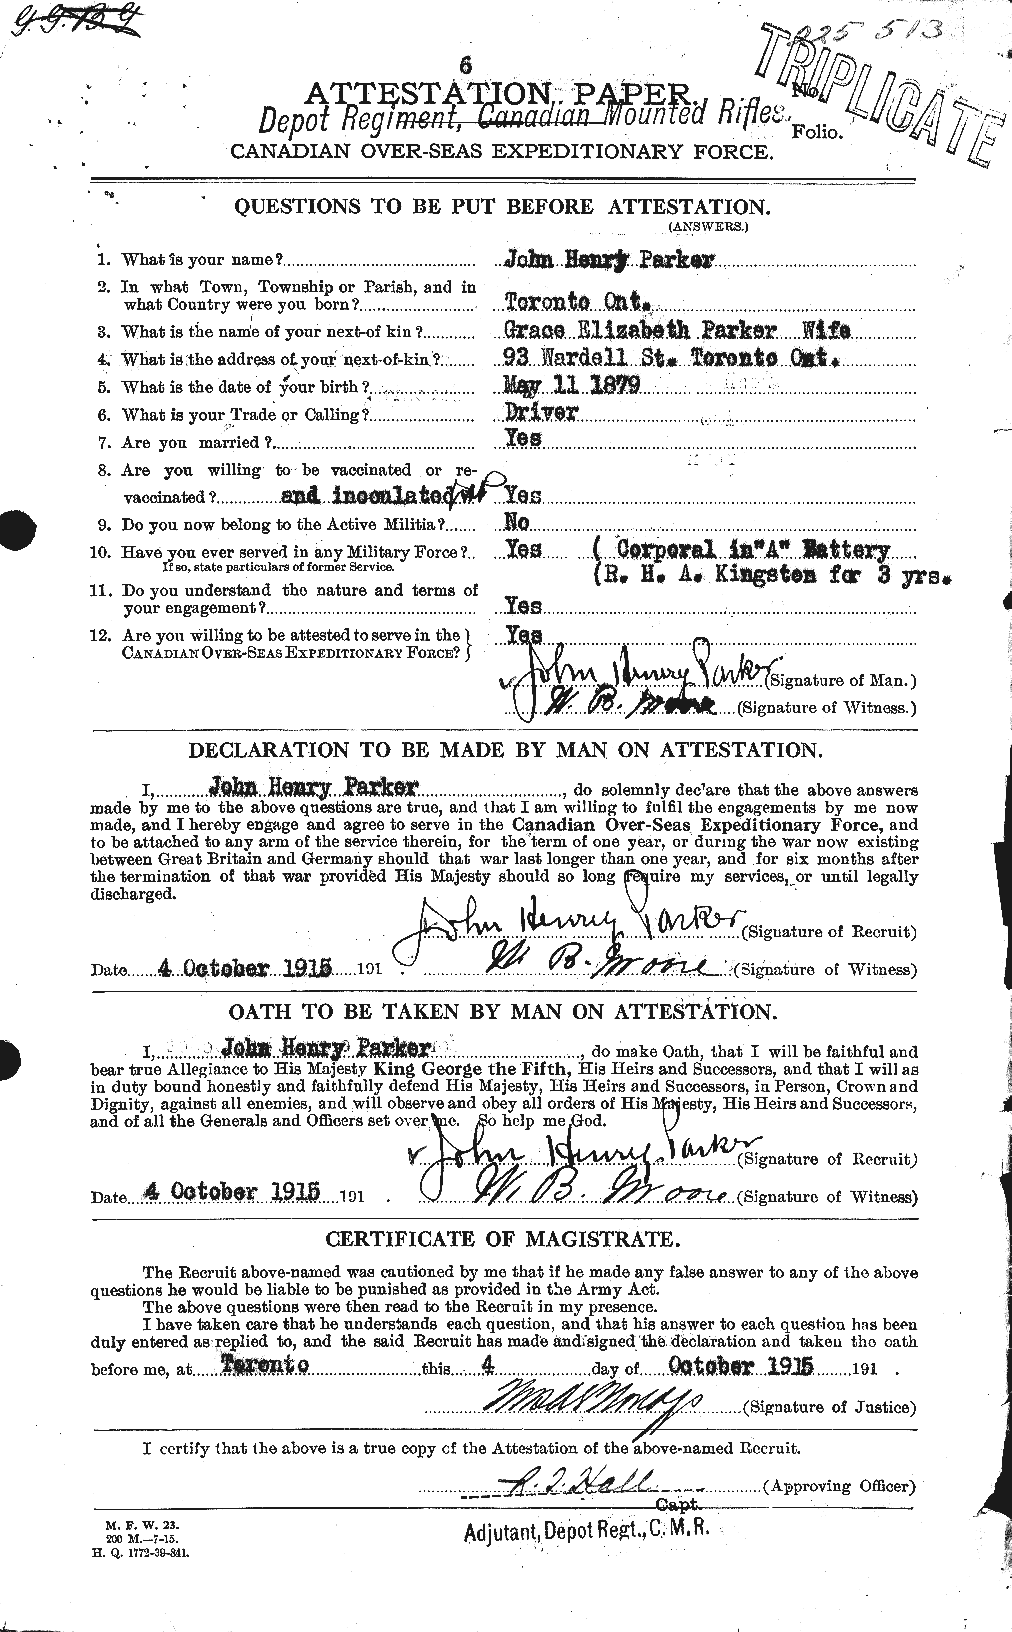 Personnel Records of the First World War - CEF 565475a